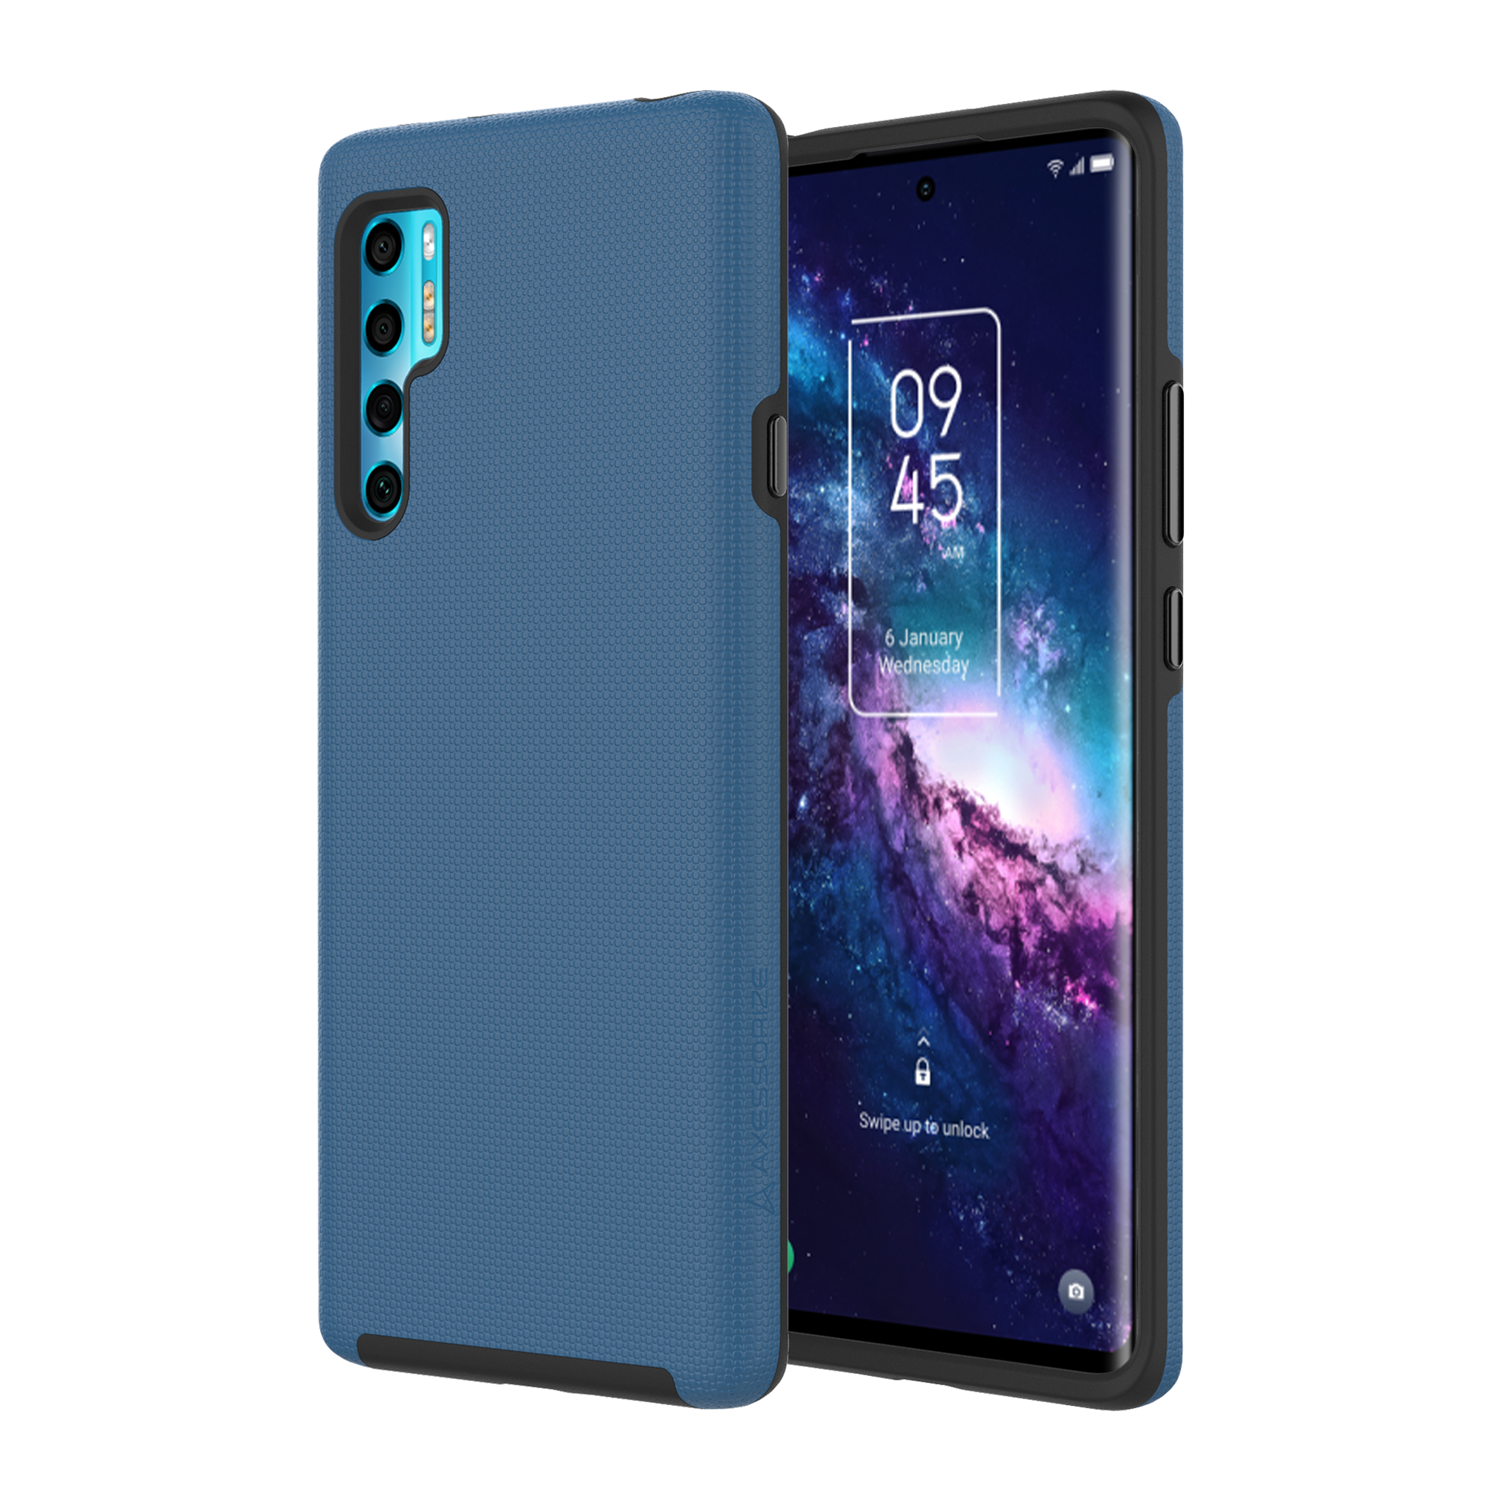 Axessorize PROTech Dual-Layered Anti-Shock Case with Military-Grade Durability for TCL 20 Pro 5G